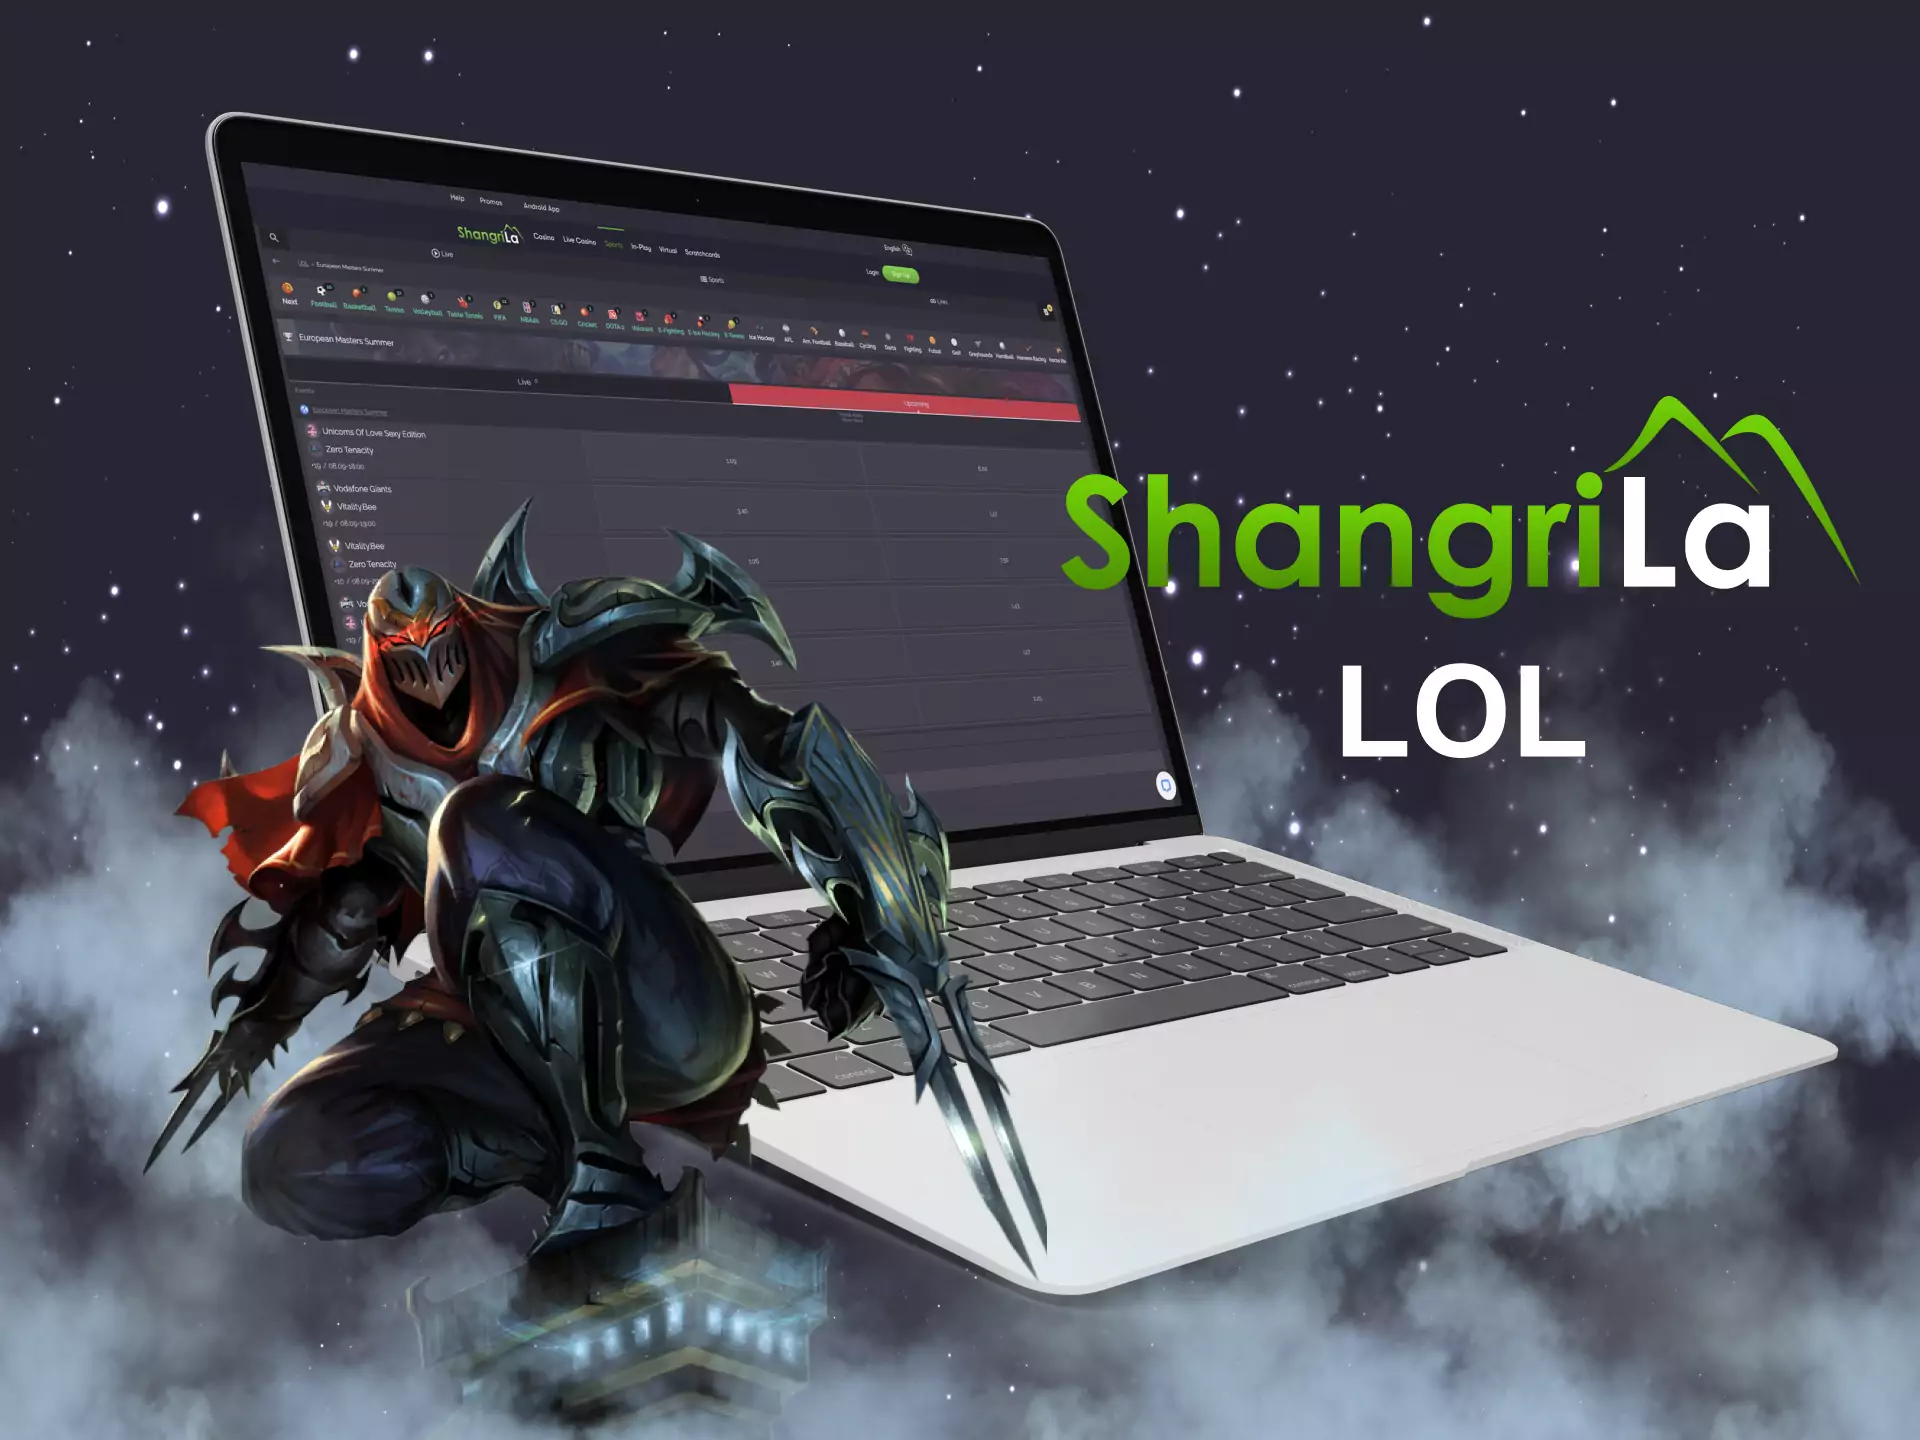 You can bet on the League of Legends events at Shangri La.